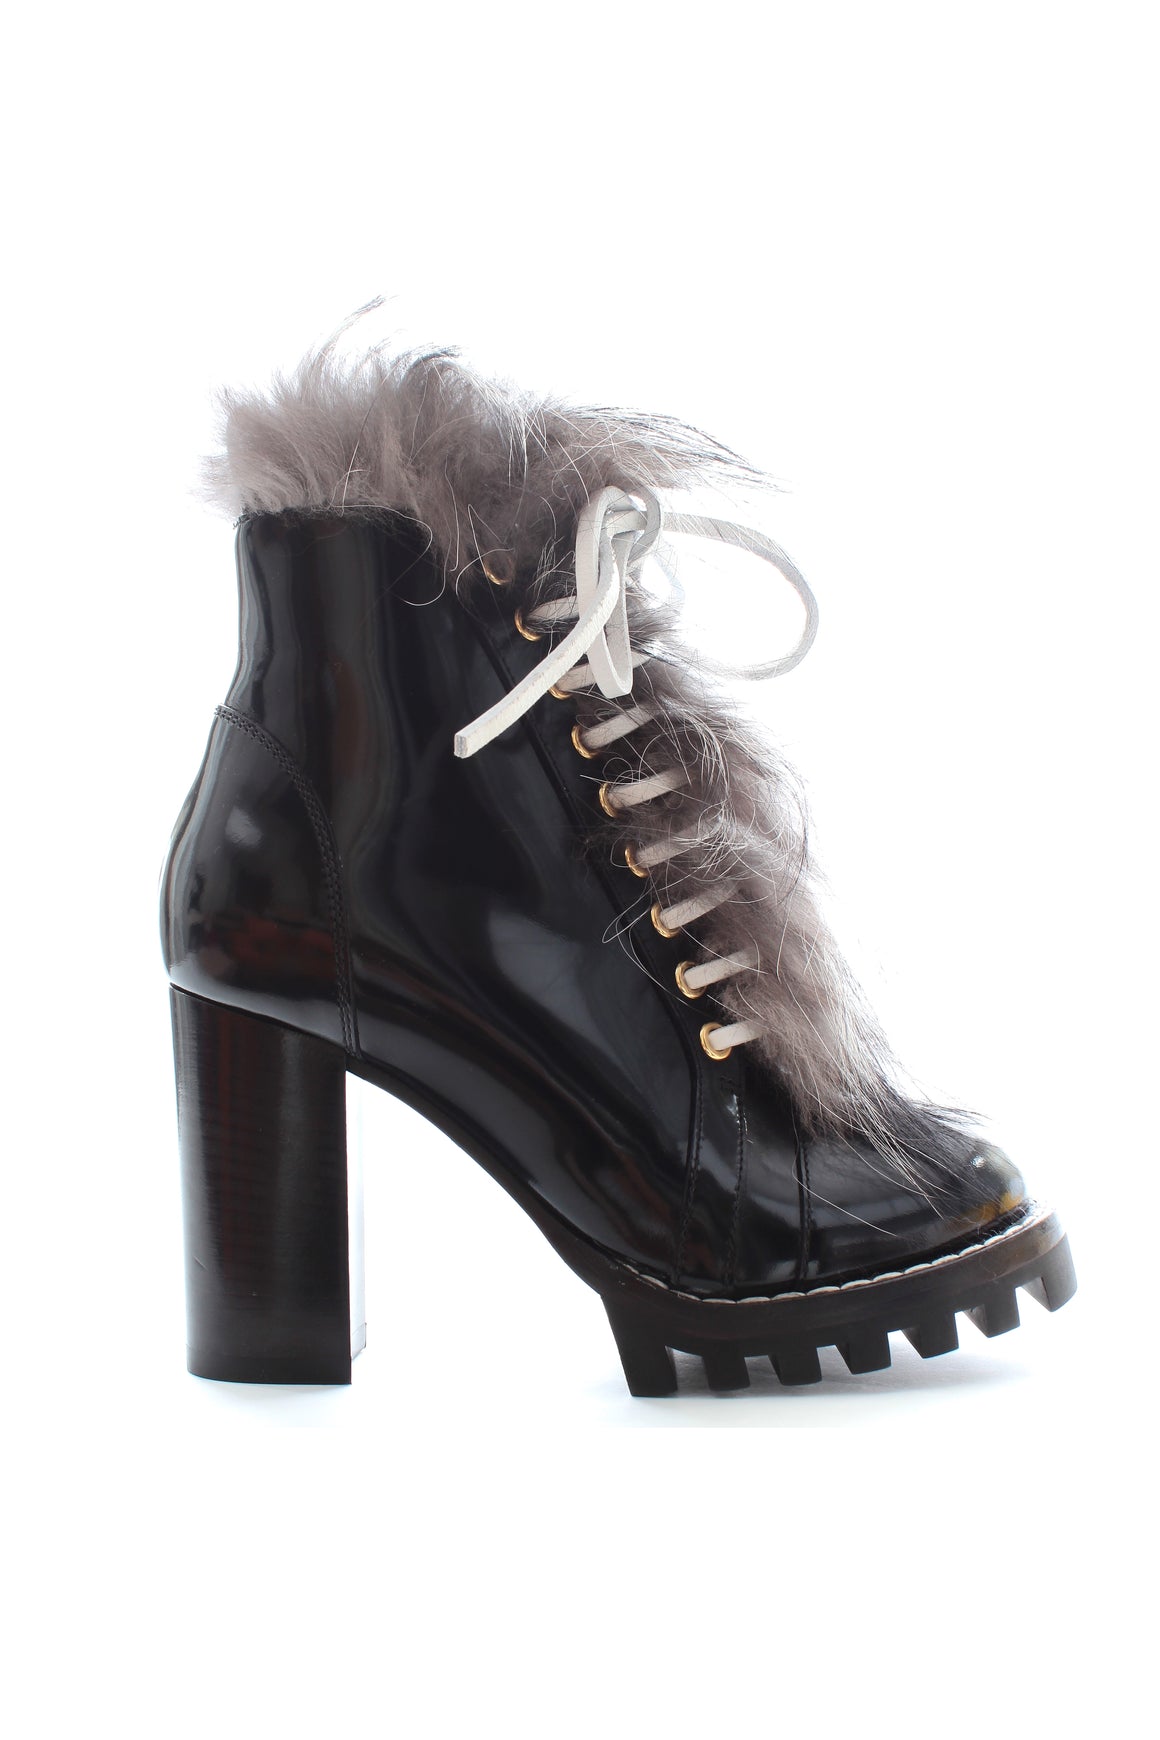 Louis Vuitton Fur Patent Leather Star Trail Ankle Boots